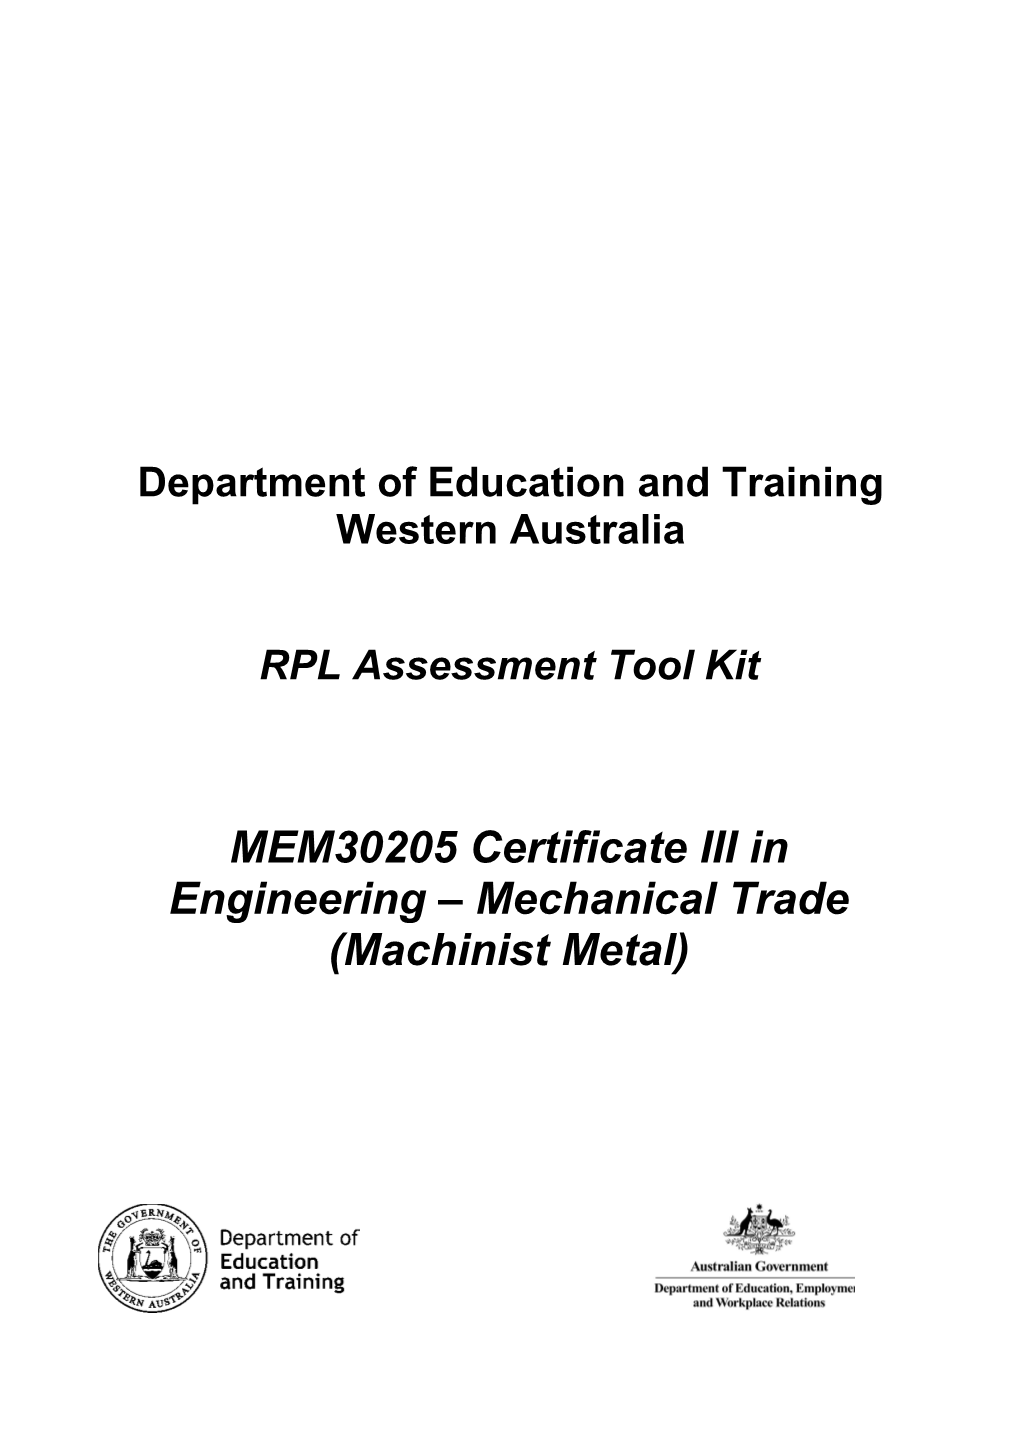 Department of Education and Training Western Australia